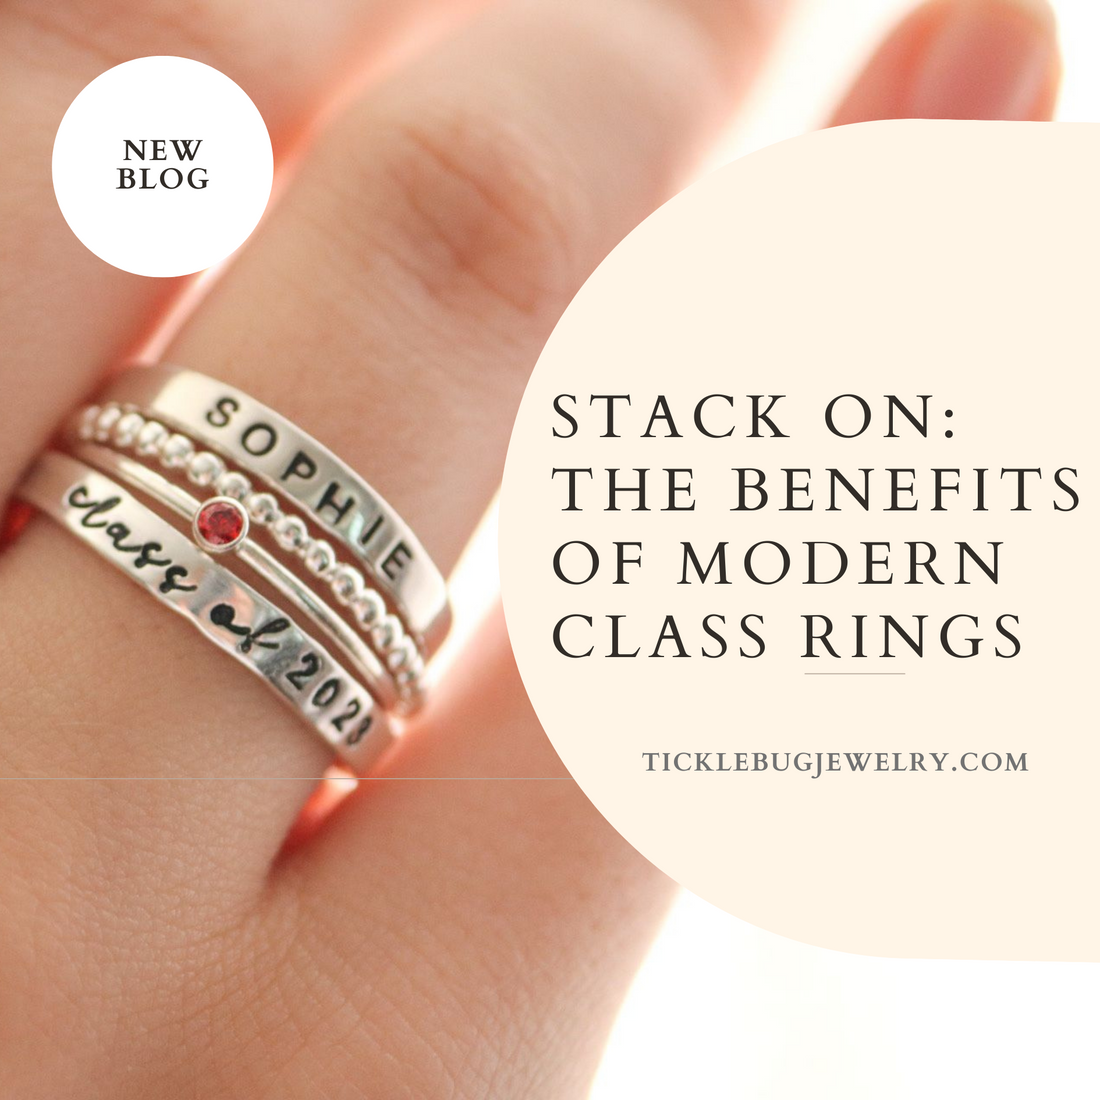 Stack On: The Benefits of Modern Class Rings